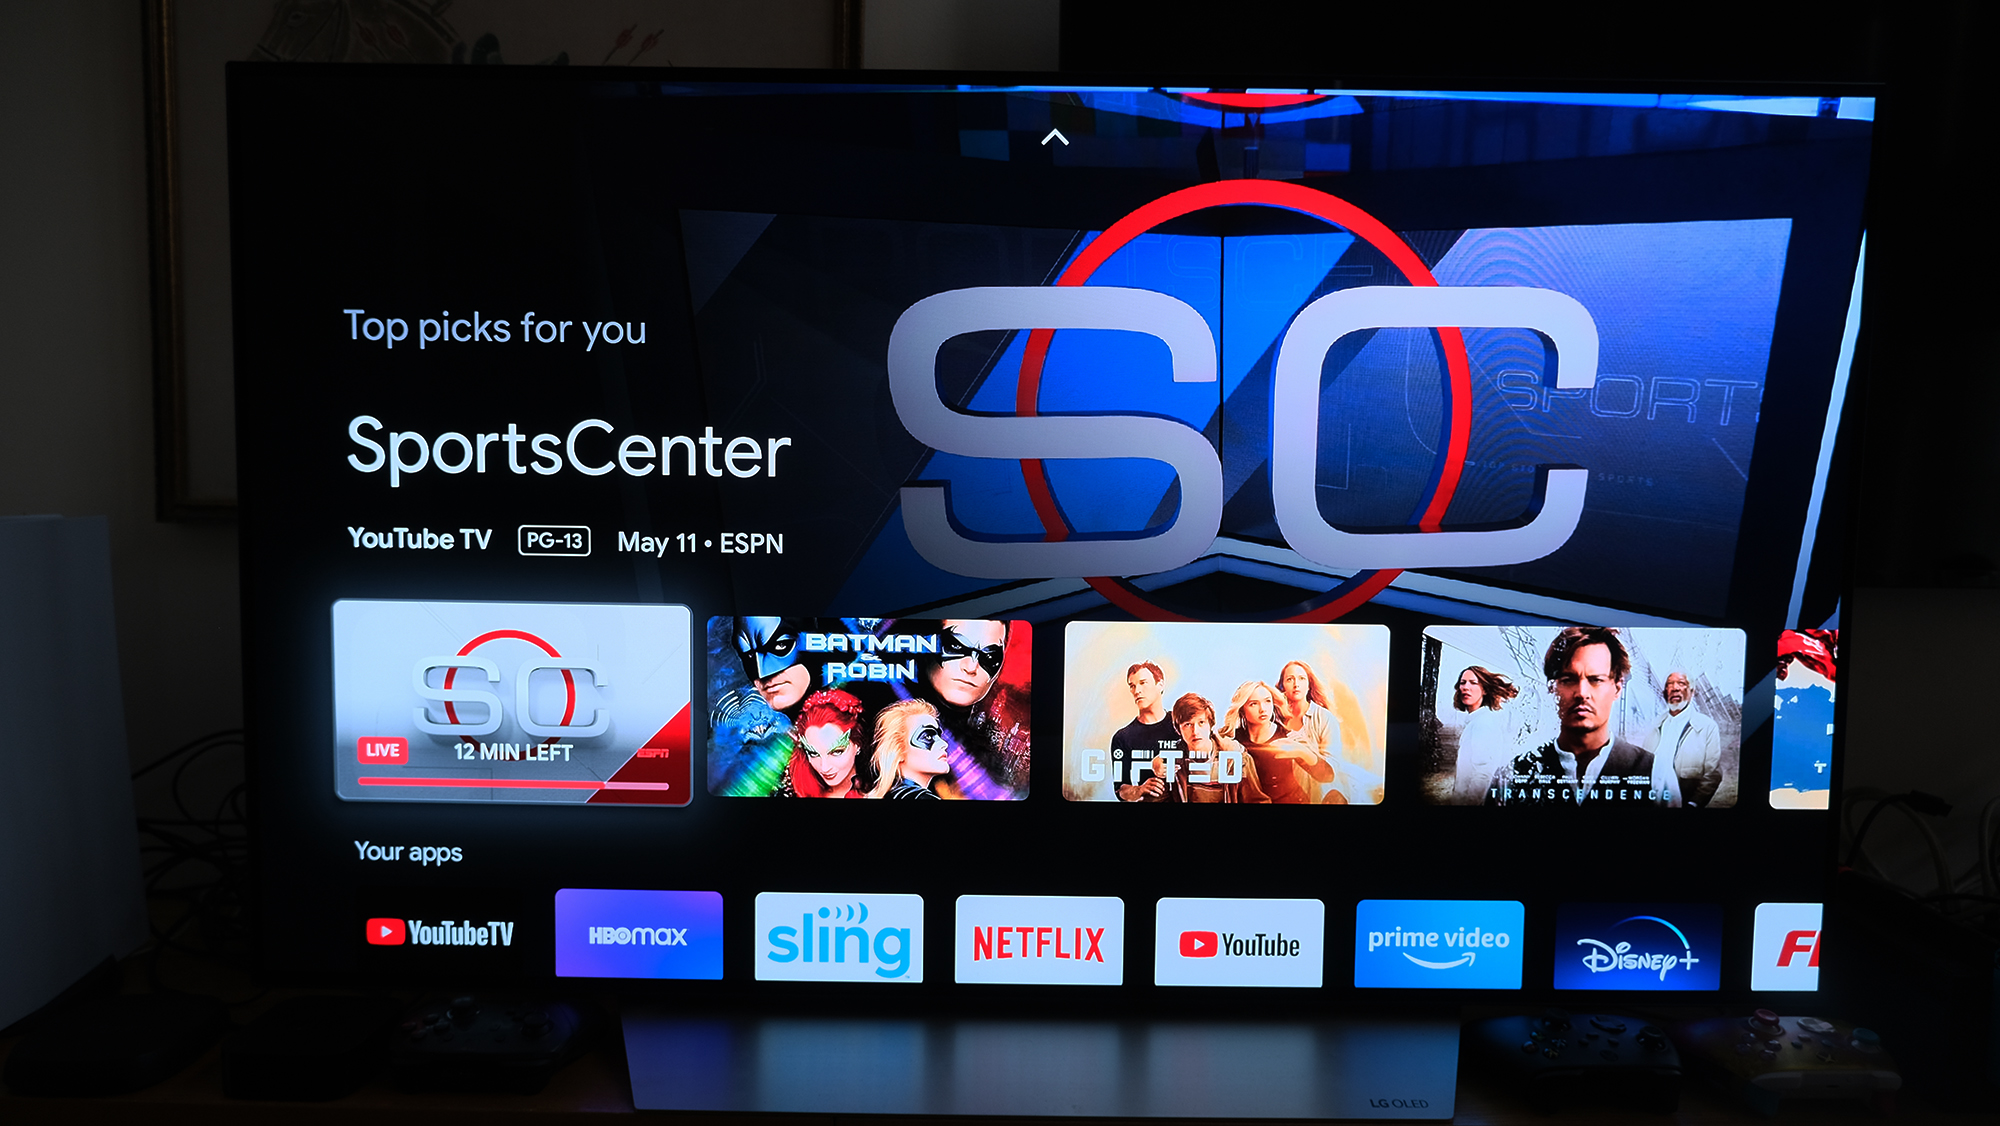 Sportscenter via YouTube TV is promoted on the Chromecast with the Google TV home screen